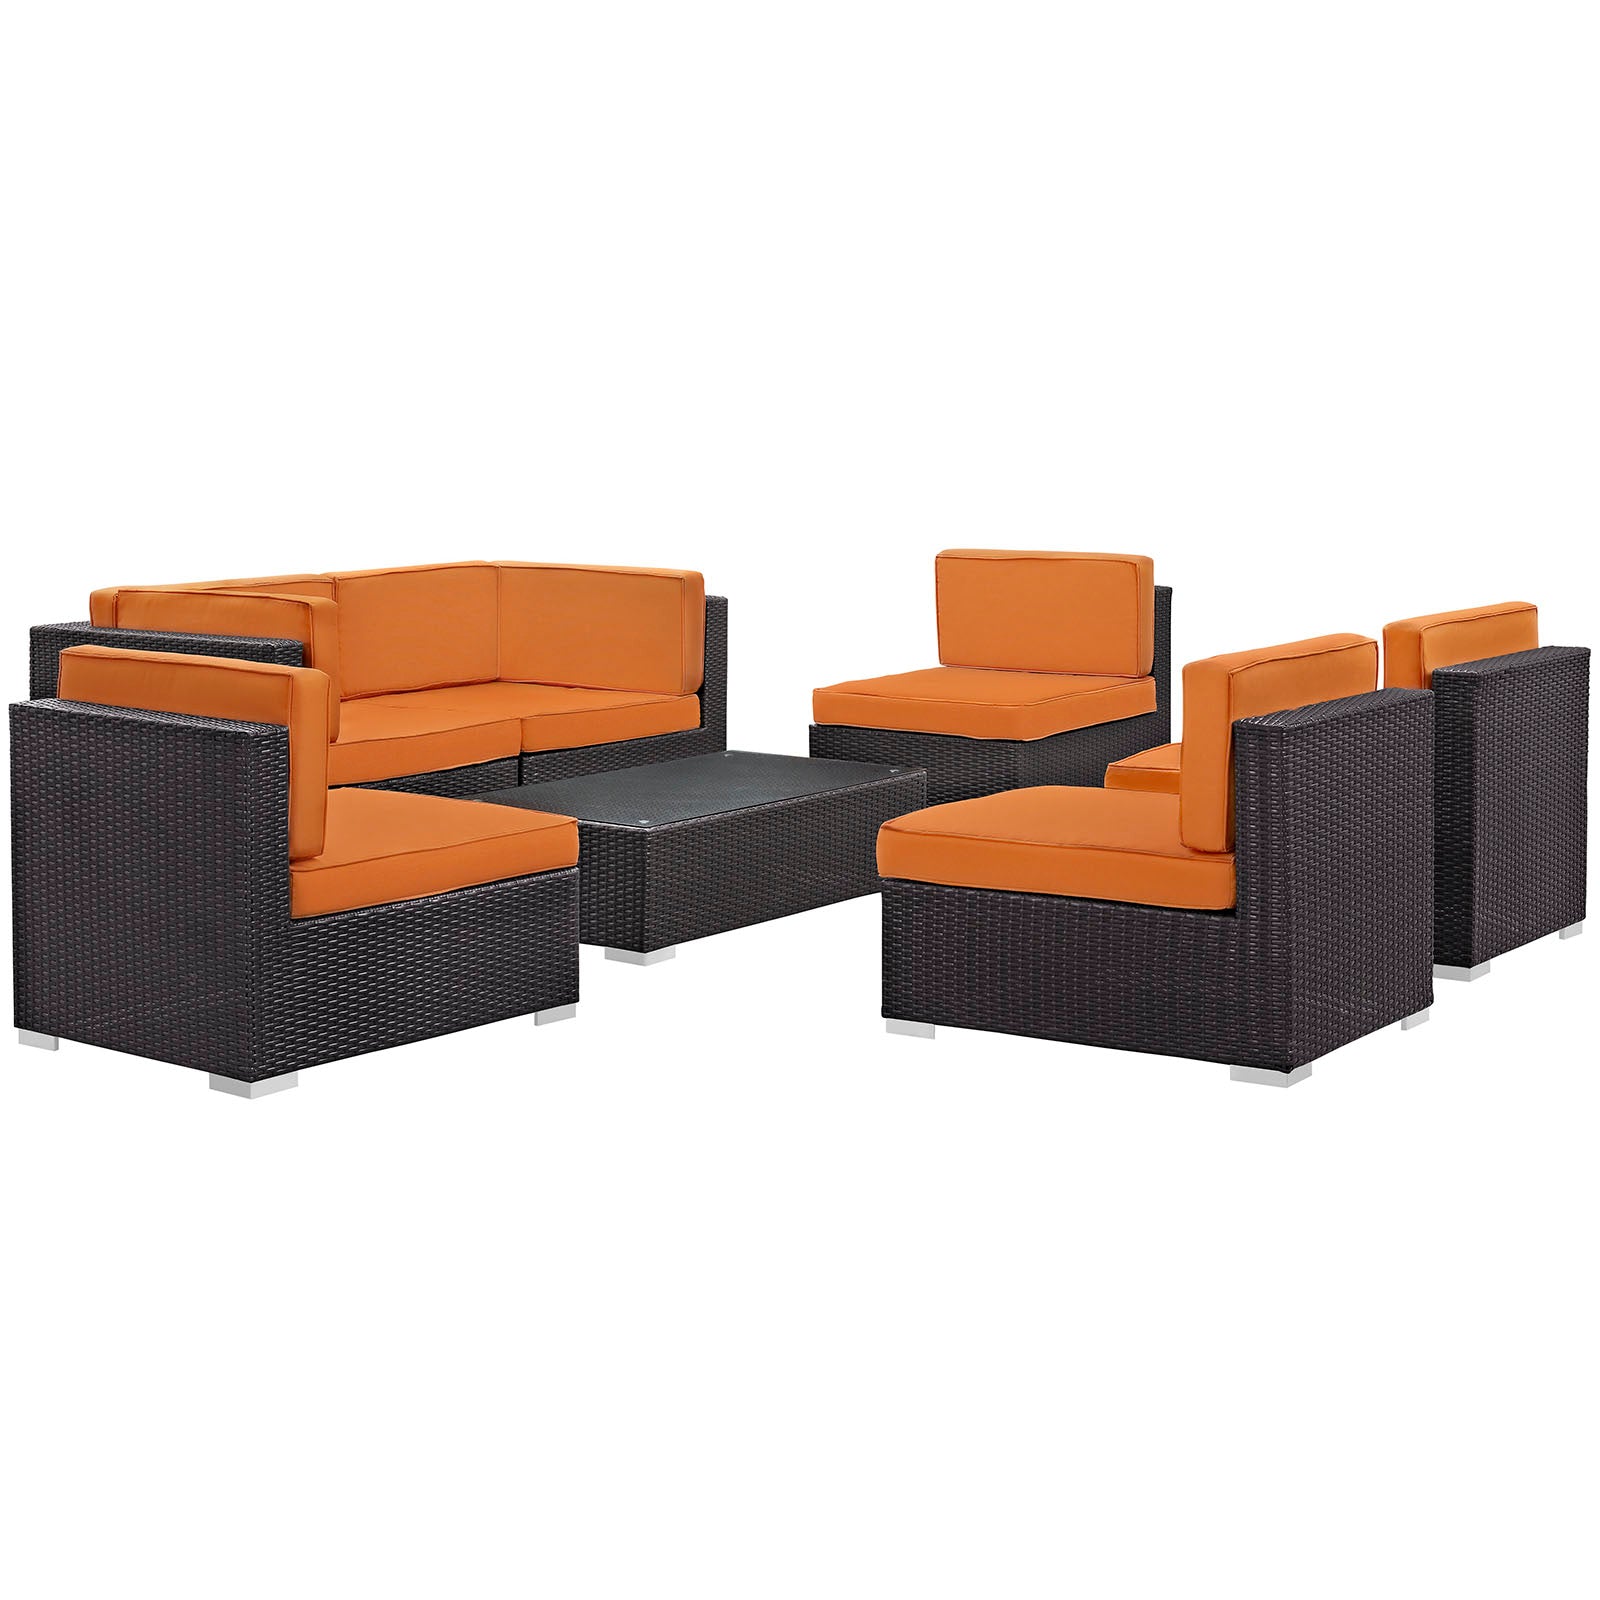 Aero 7 Piece Outdoor Patio Sectional Set-Outdoor Set-Modway-Wall2Wall Furnishings